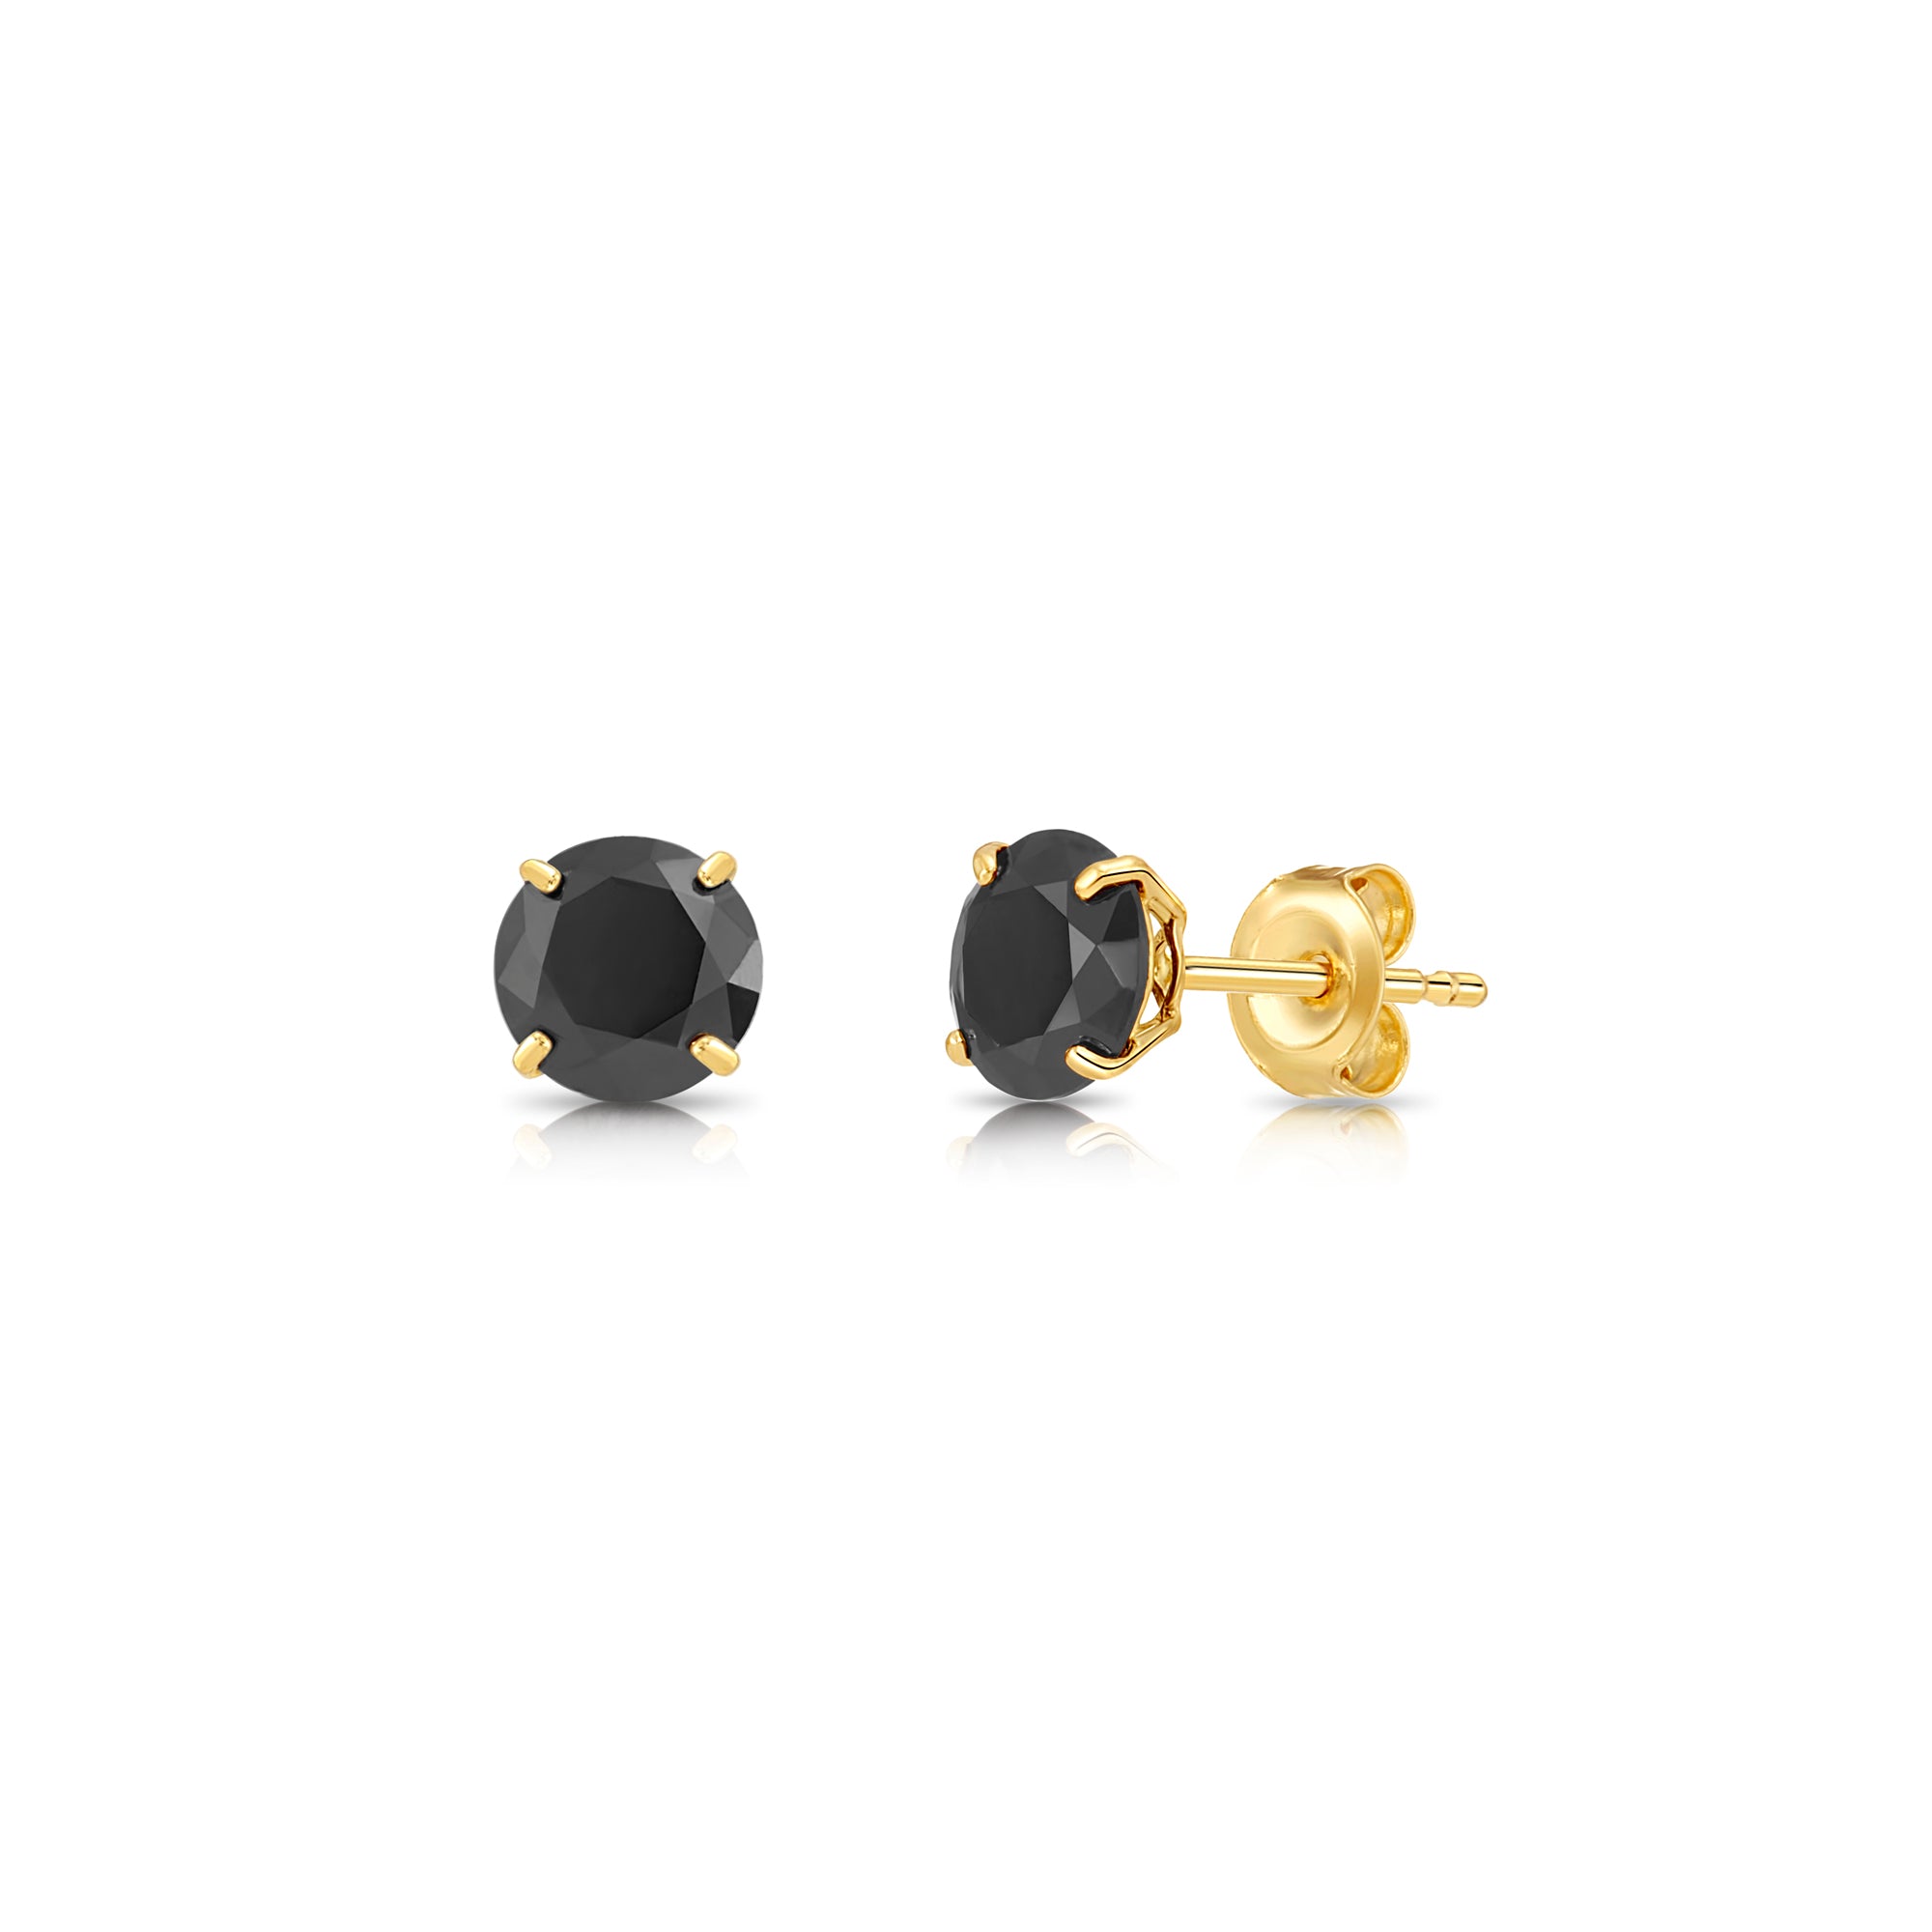 10k Yellow Gold Birthstone Stud Earrings with Pushbacks, 5mm, Available in 13 Colors